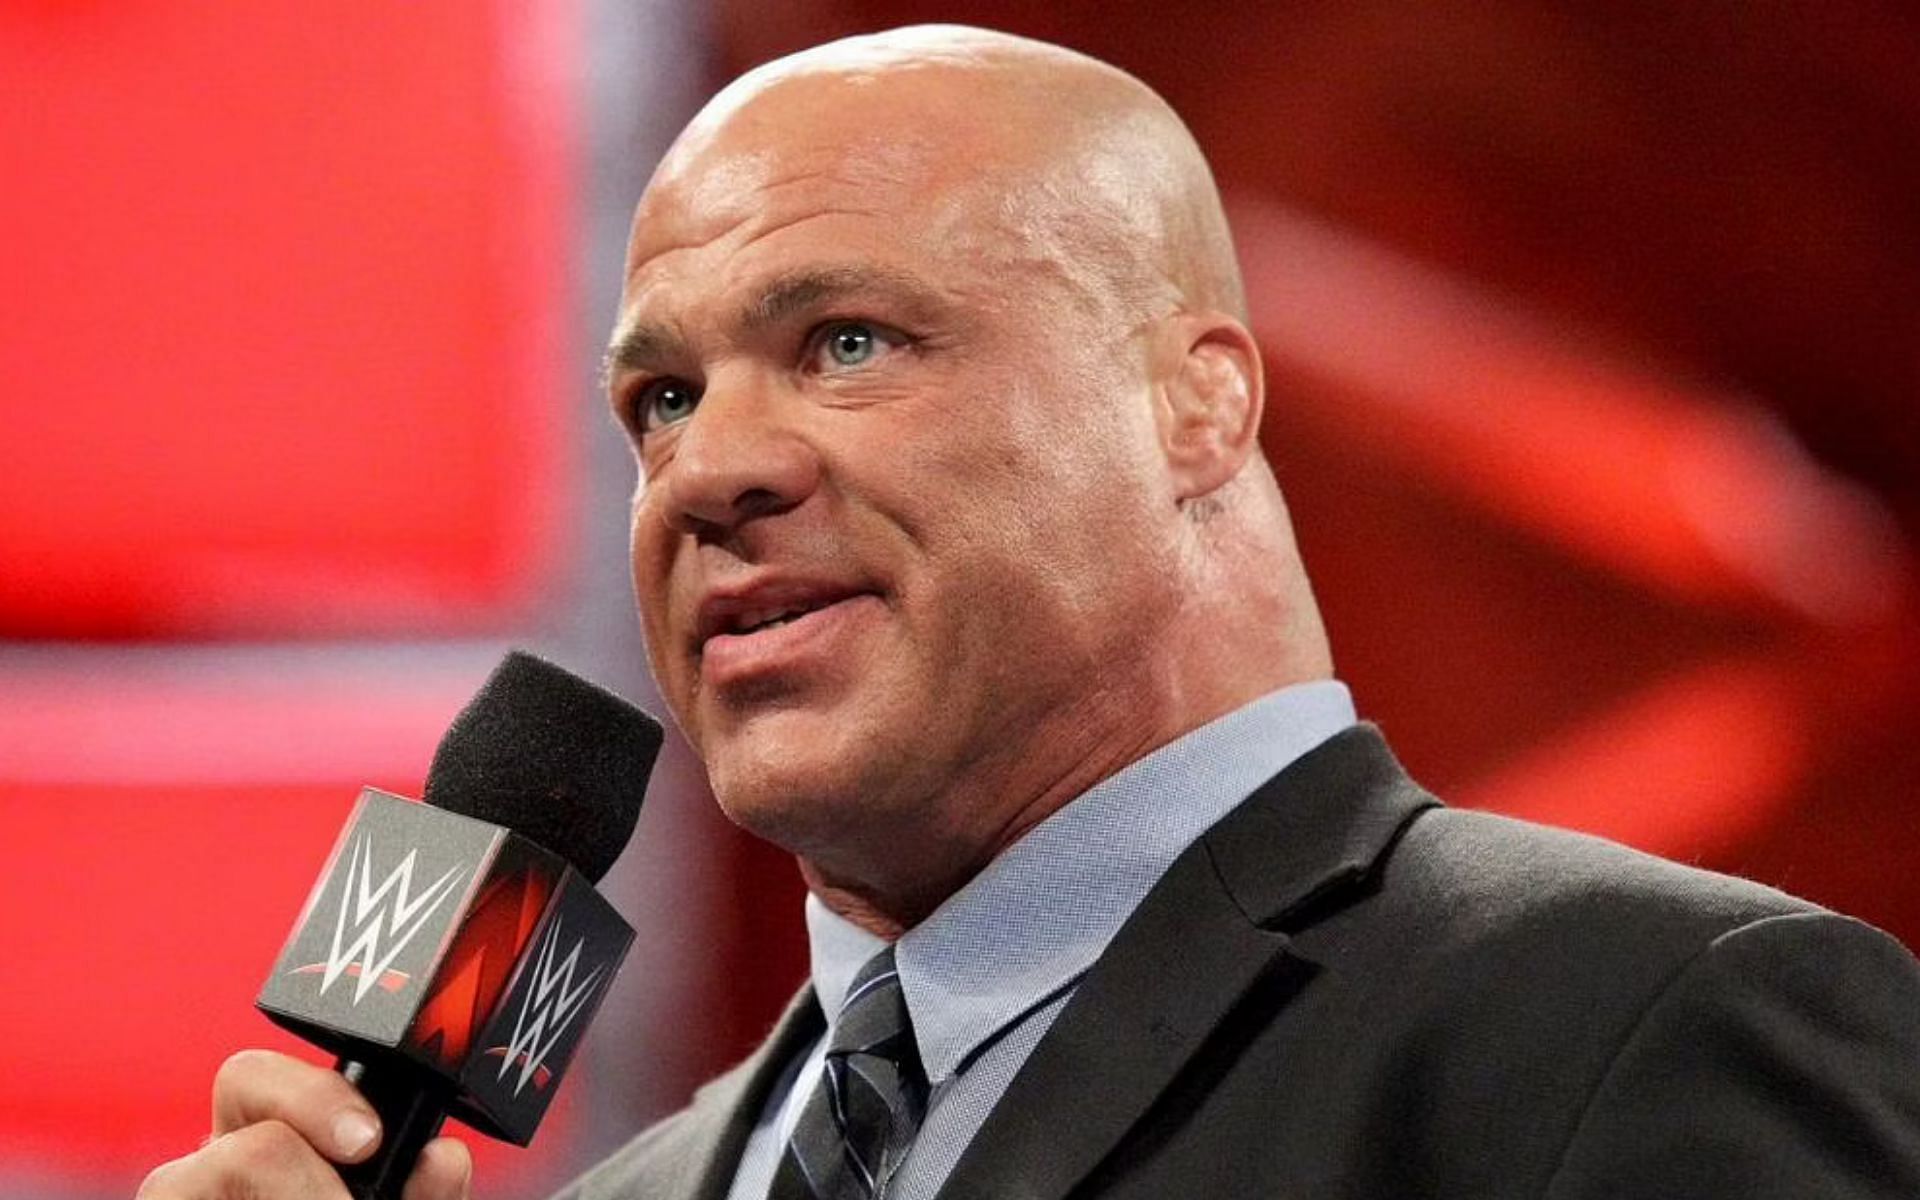 Kurt Angle names the fighter who he thinks can successfully transition from MMA to WWE